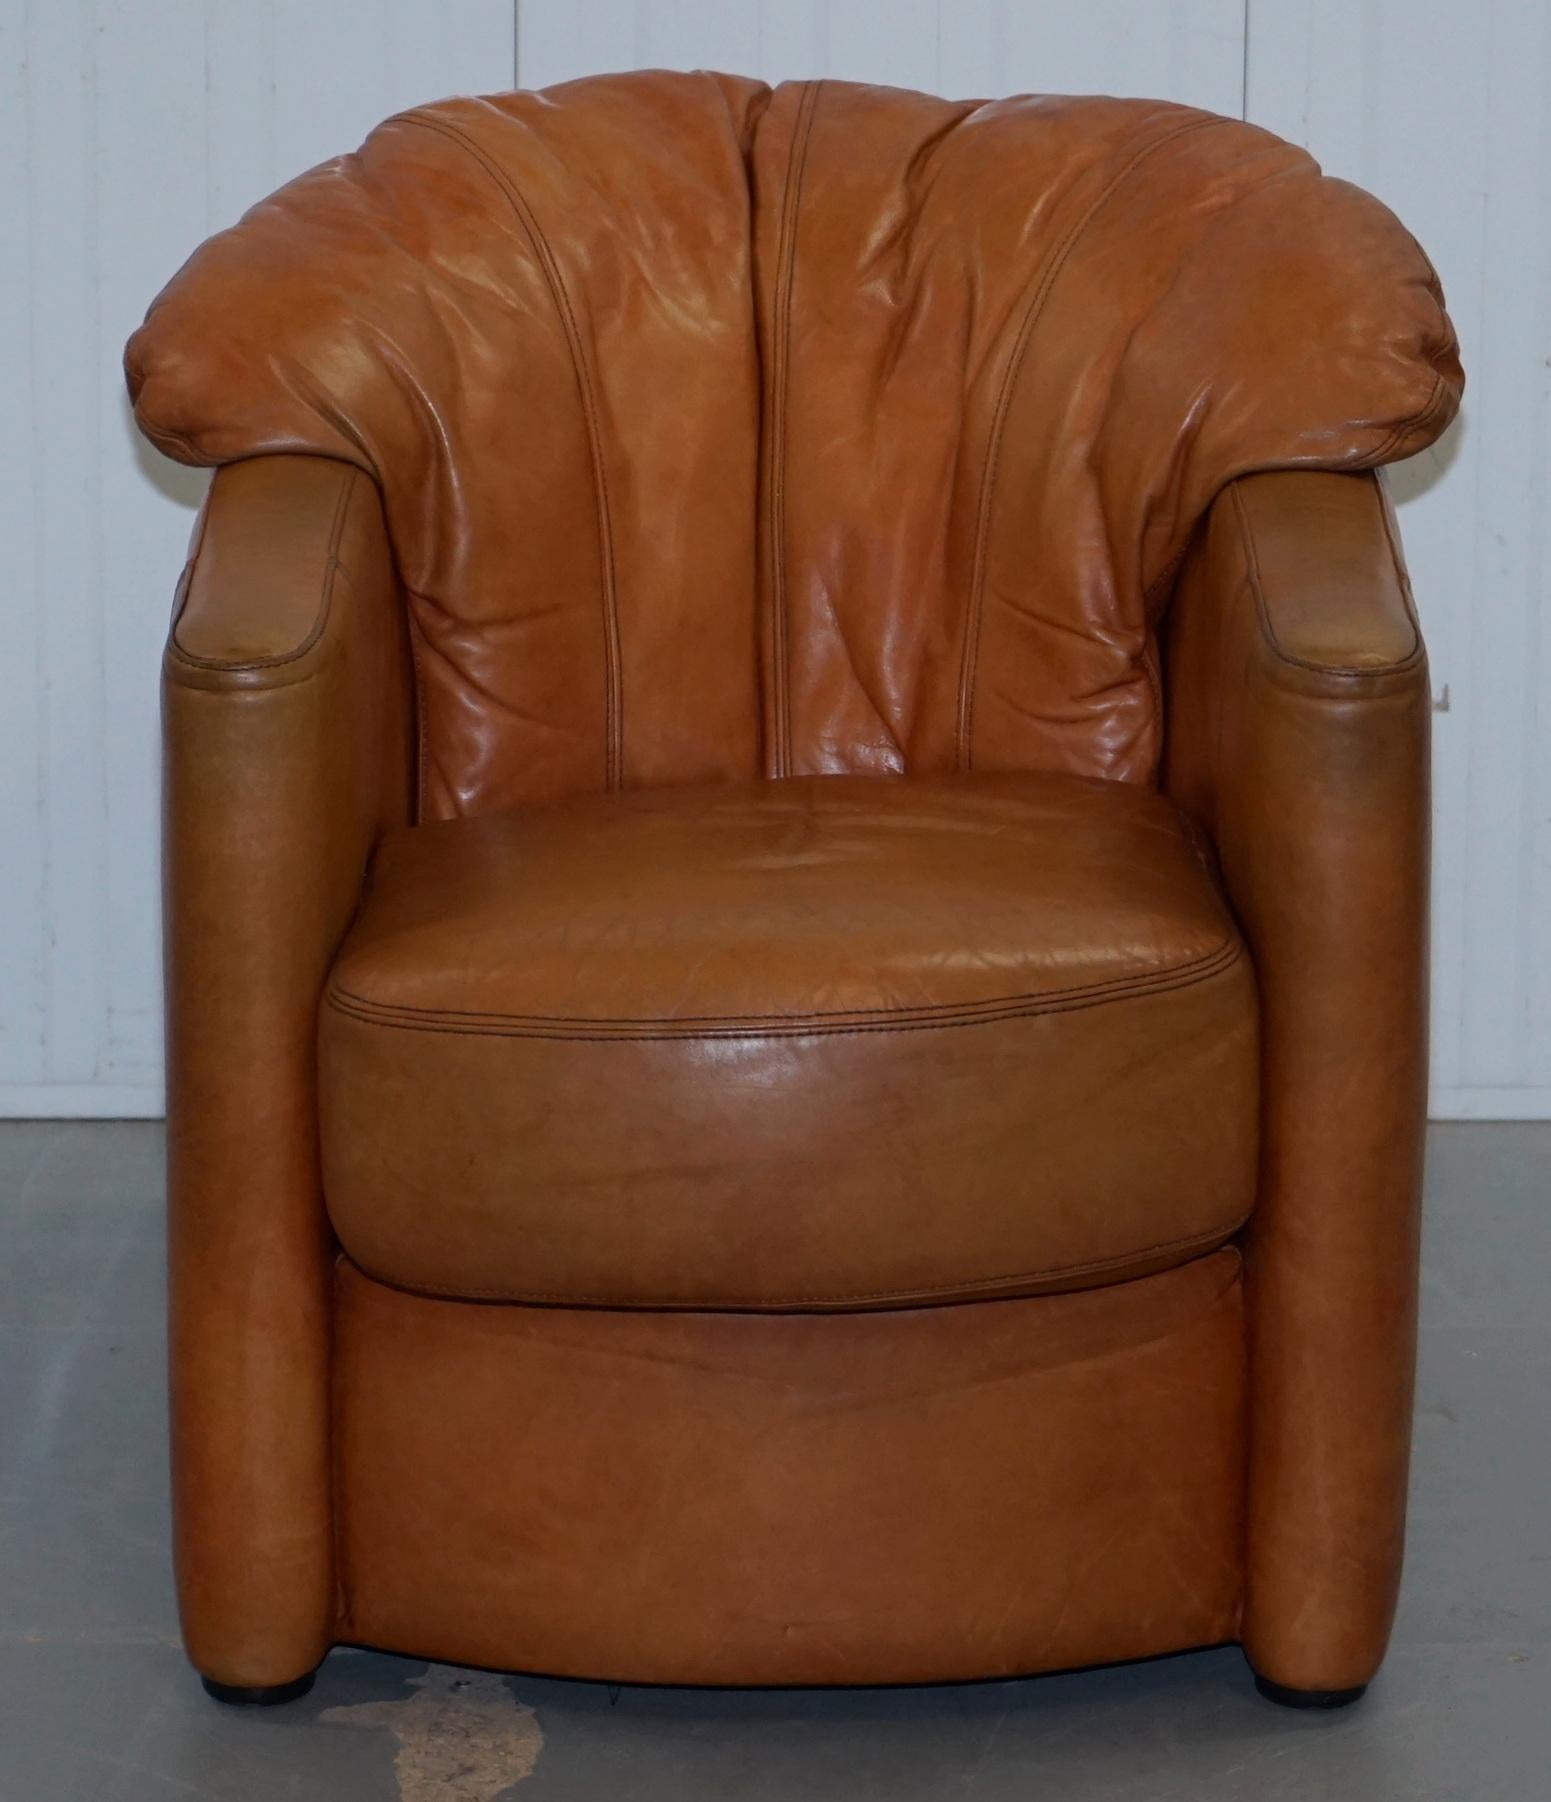 We are delighted to offer for sale this lovely aged tan brown leather Tetrad vintage tub armchair with shell back pleating


A very comfortable little armchair, made by tetrad around 30 years ago, these chairs are highly collatable due to the